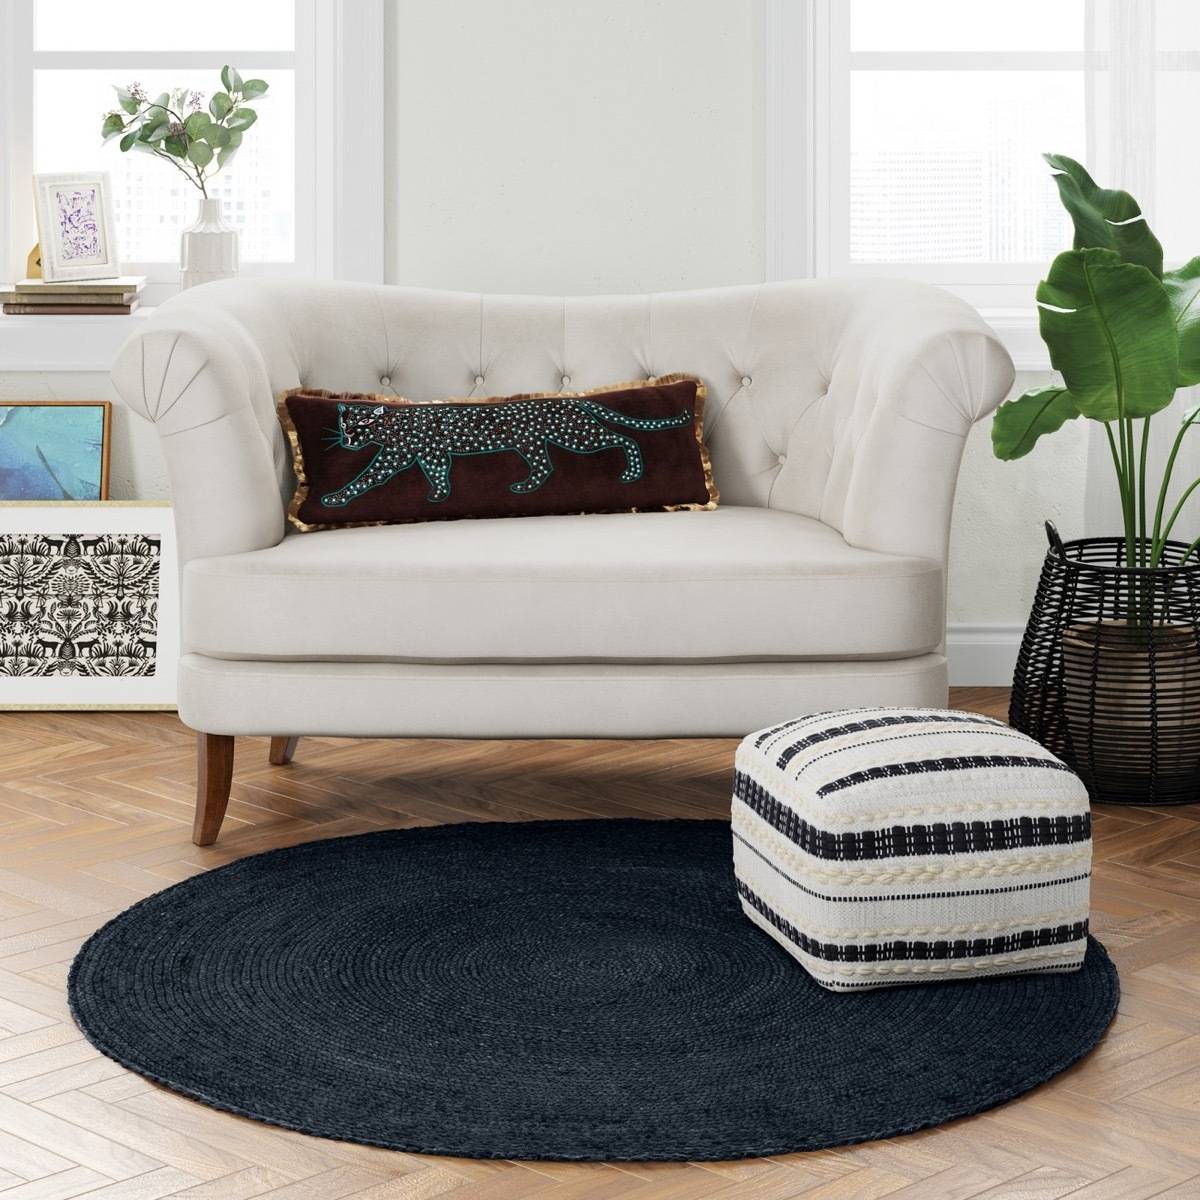 10 affordable furniture and home decor pieces for under $100 - Braided jute rug from Target